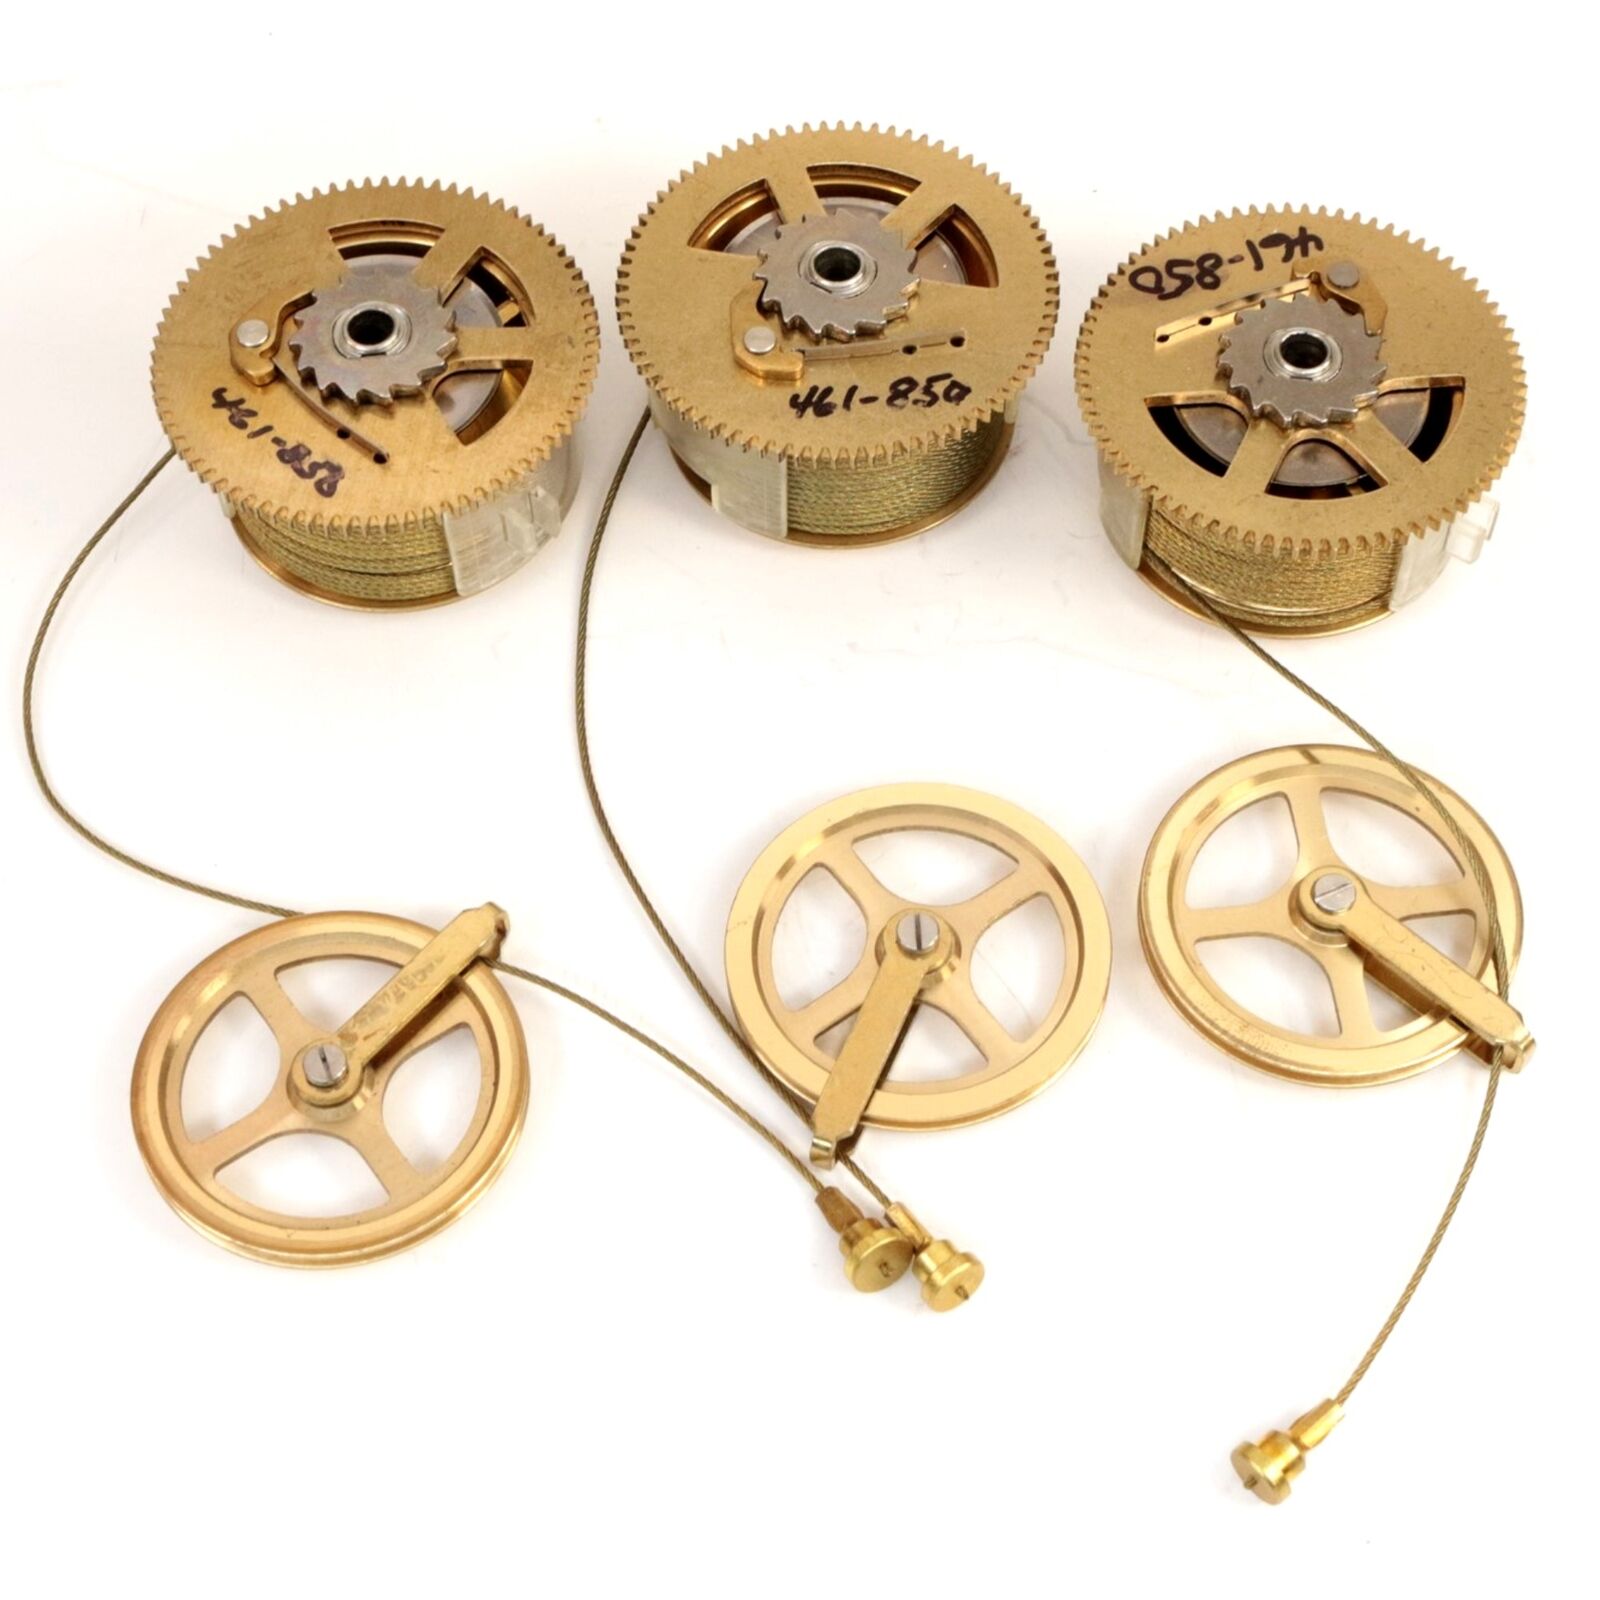 Brass Clock 461-850 Pulleys for Hermle Cable Clock 461-850 Set of Three YP242